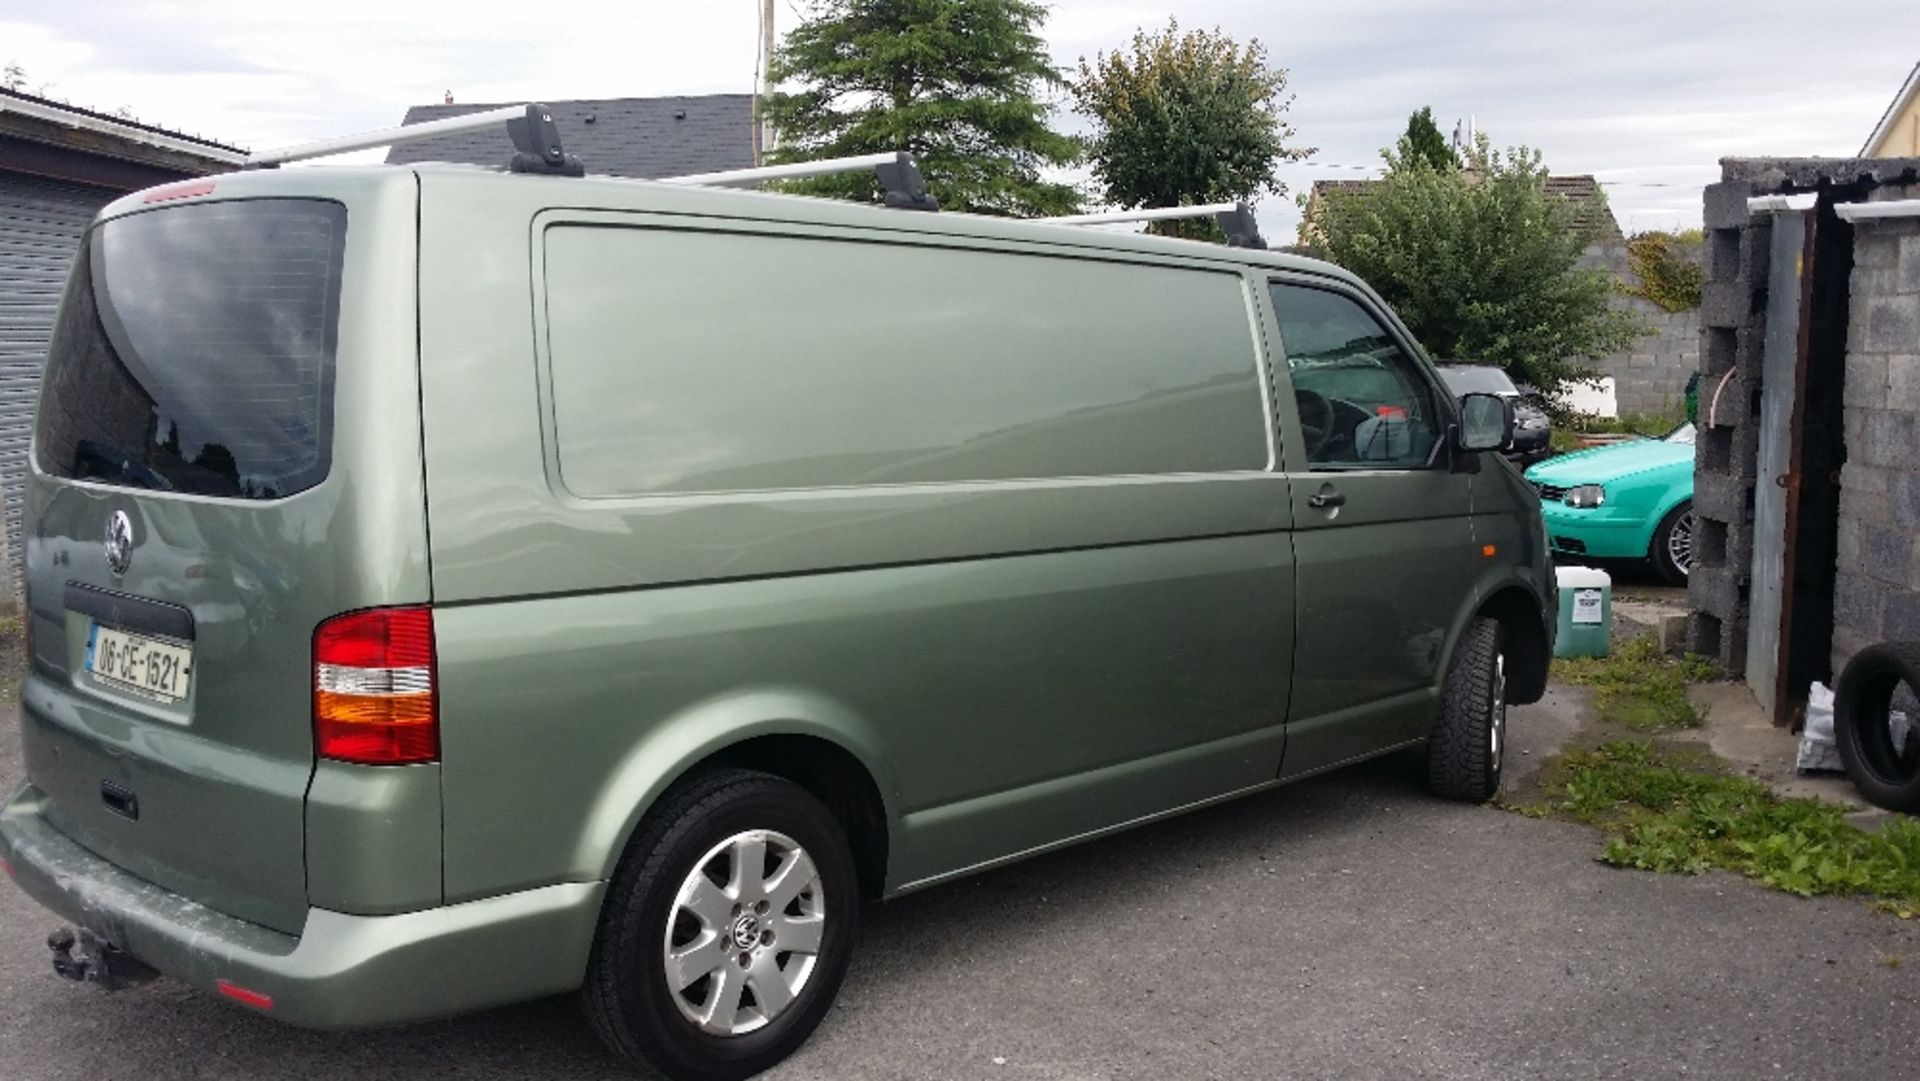 VW Transporter 2.5 TDI LWD with 4no. New Tyres, Oil Cooler, Bushings Fully Serviced. Irish Reg.